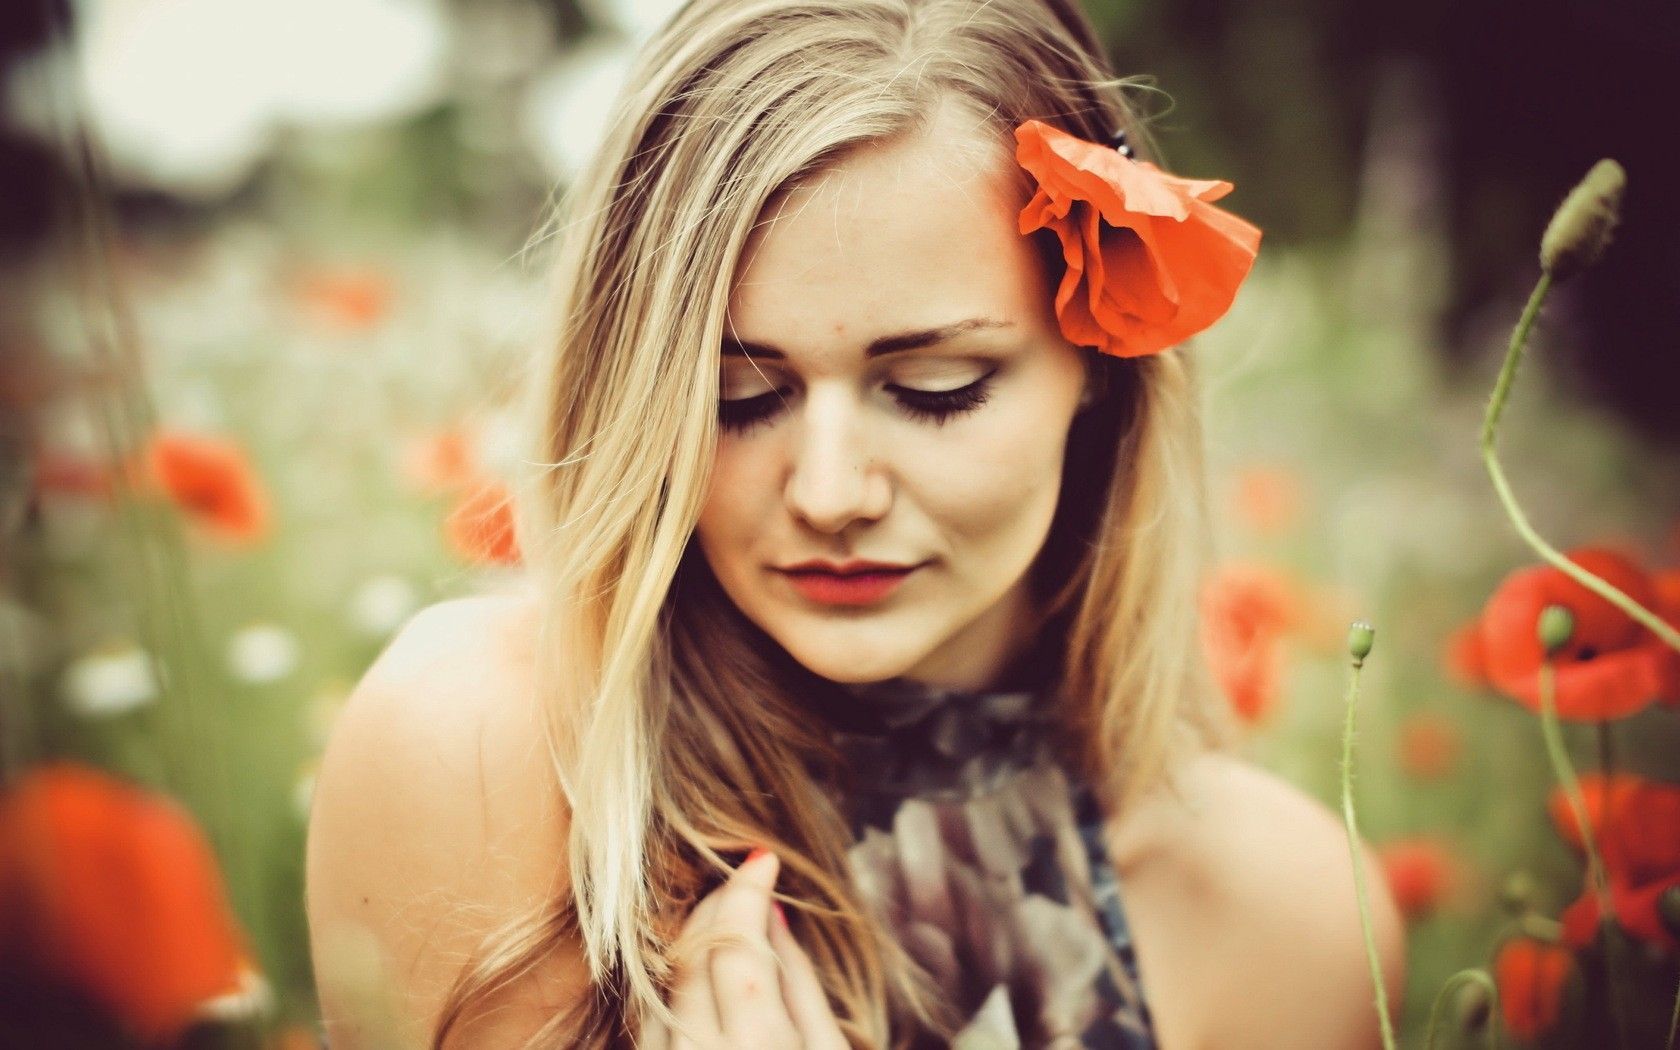 Blonde Girl with Poppy Flower wallpapers | Blonde Girl with Poppy ...